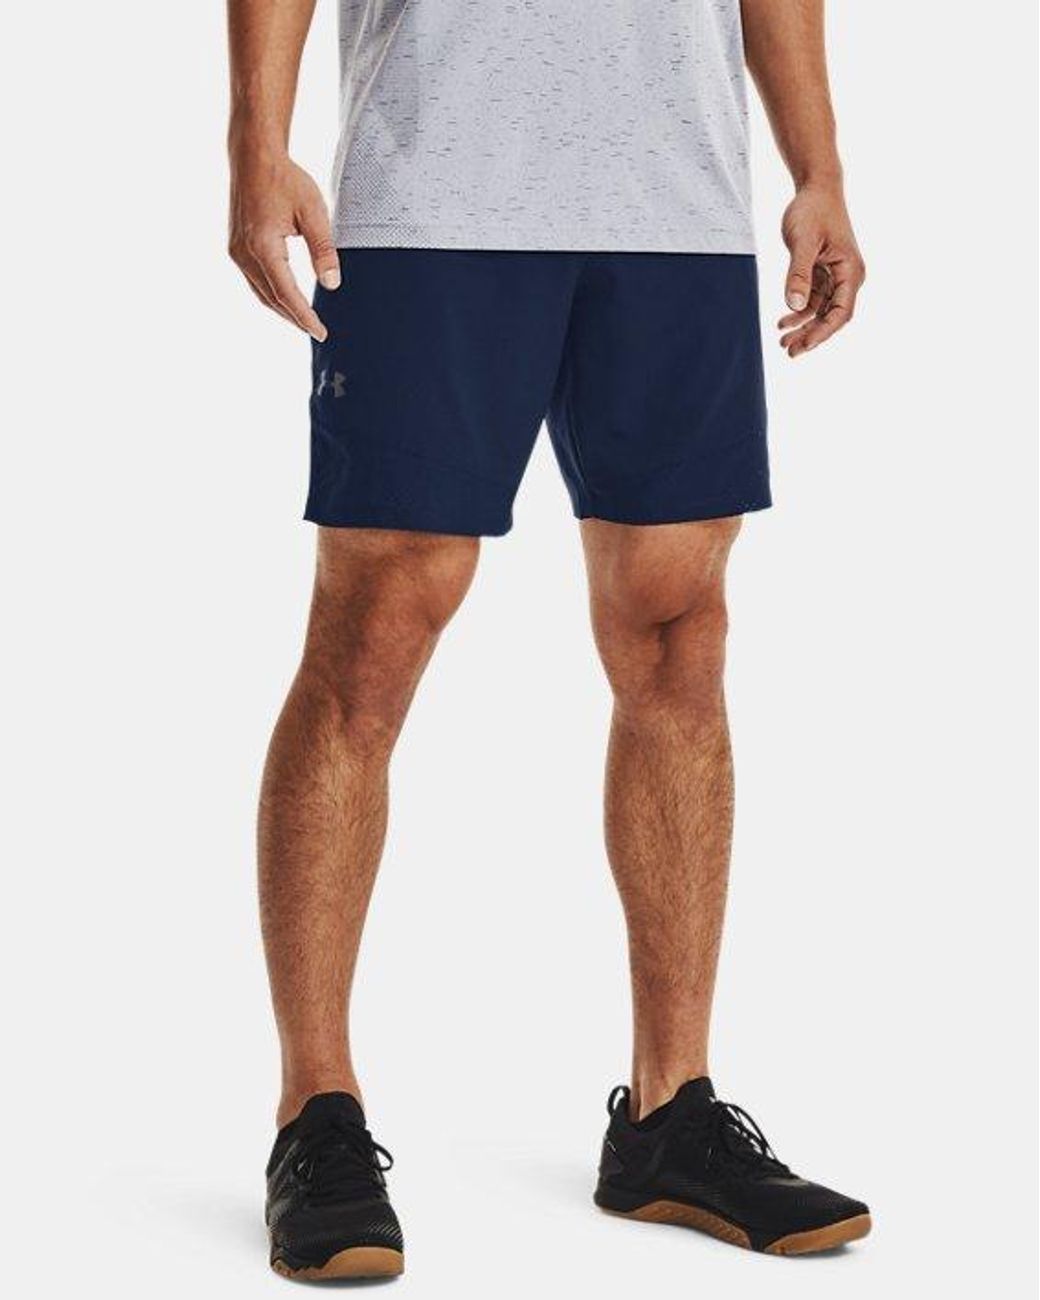 Under Armour Ua Vanish Woven Shorts in Navy (Blue) for Men - Lyst